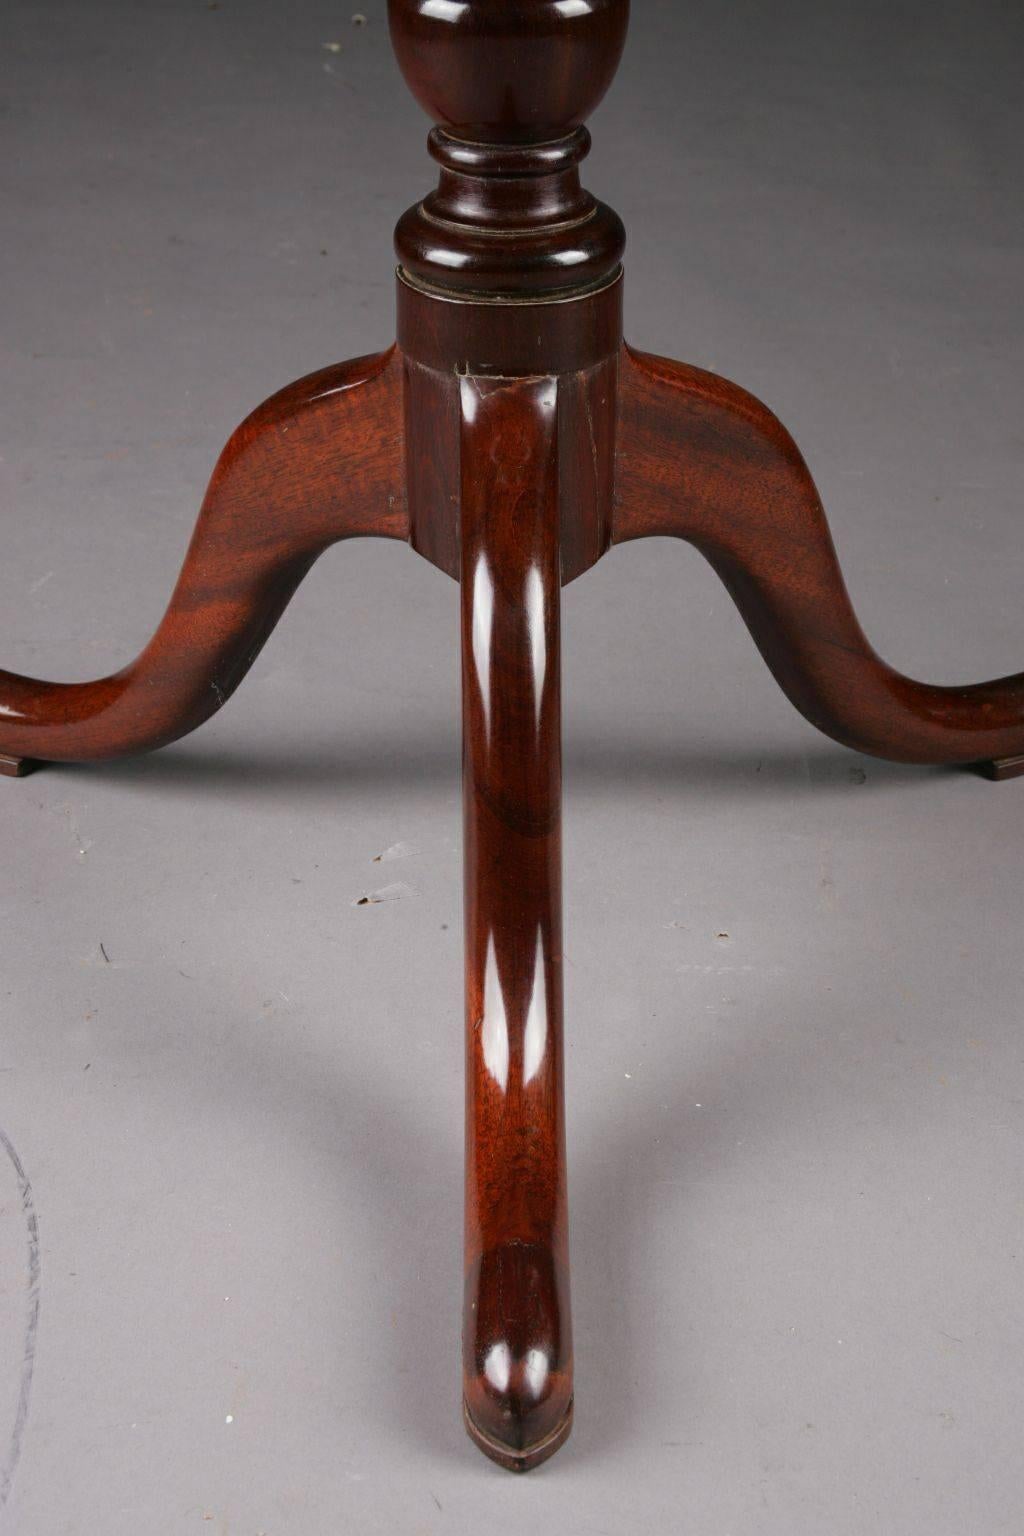 19th Century English Regency Folding Table or Tripod For Sale 1